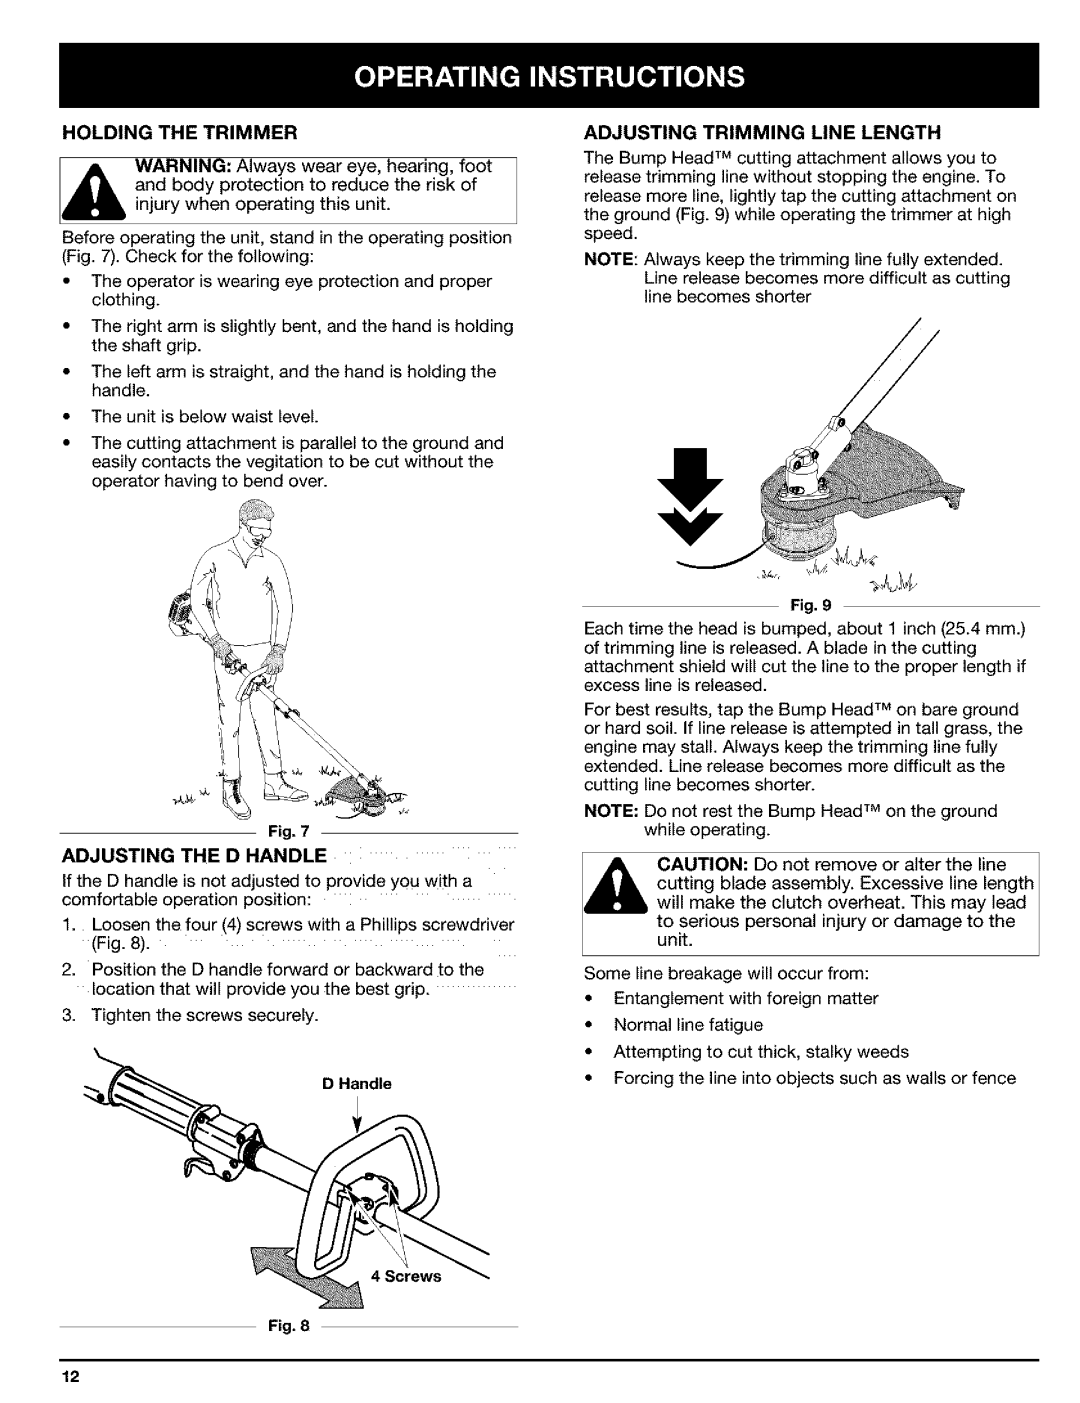 Ryobi Outdoor manual Holding The Trimmer, Fig. ADJUSTING THE D HANDLE, Adjusting Trimming Line Length 